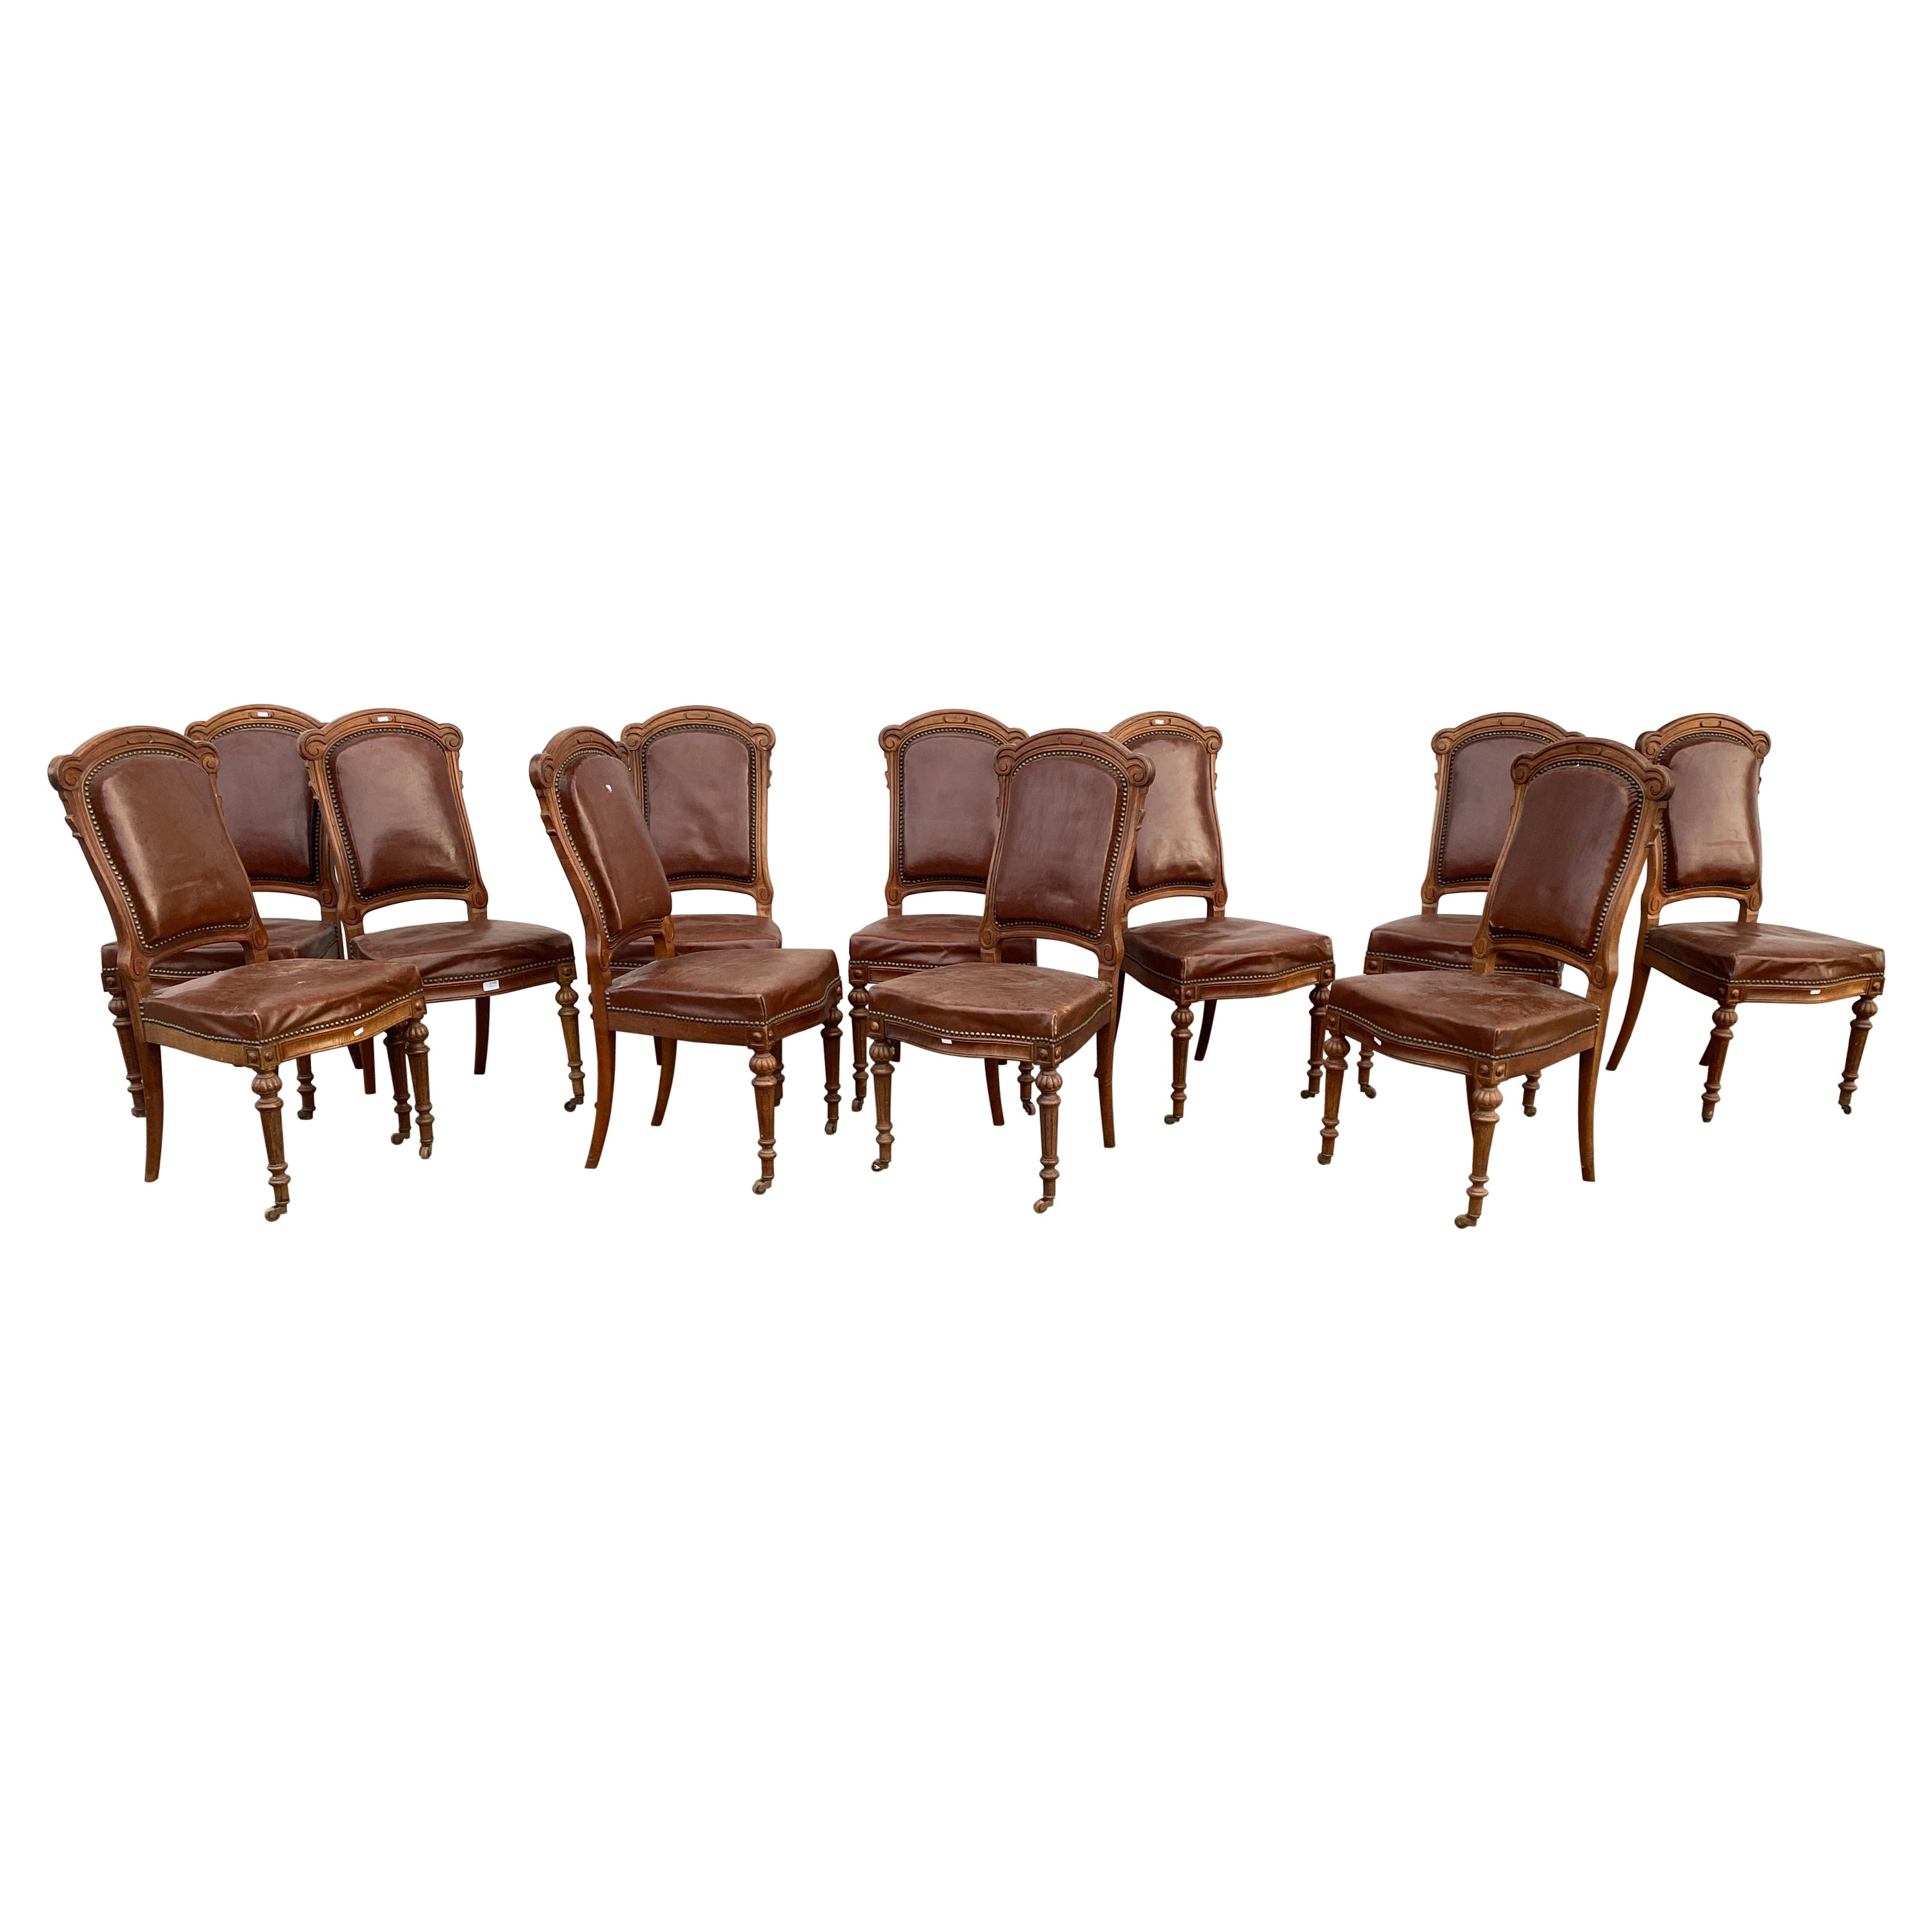 Rare suite of 12 Louis Philipe period chairs in oak and leather, 19th century 